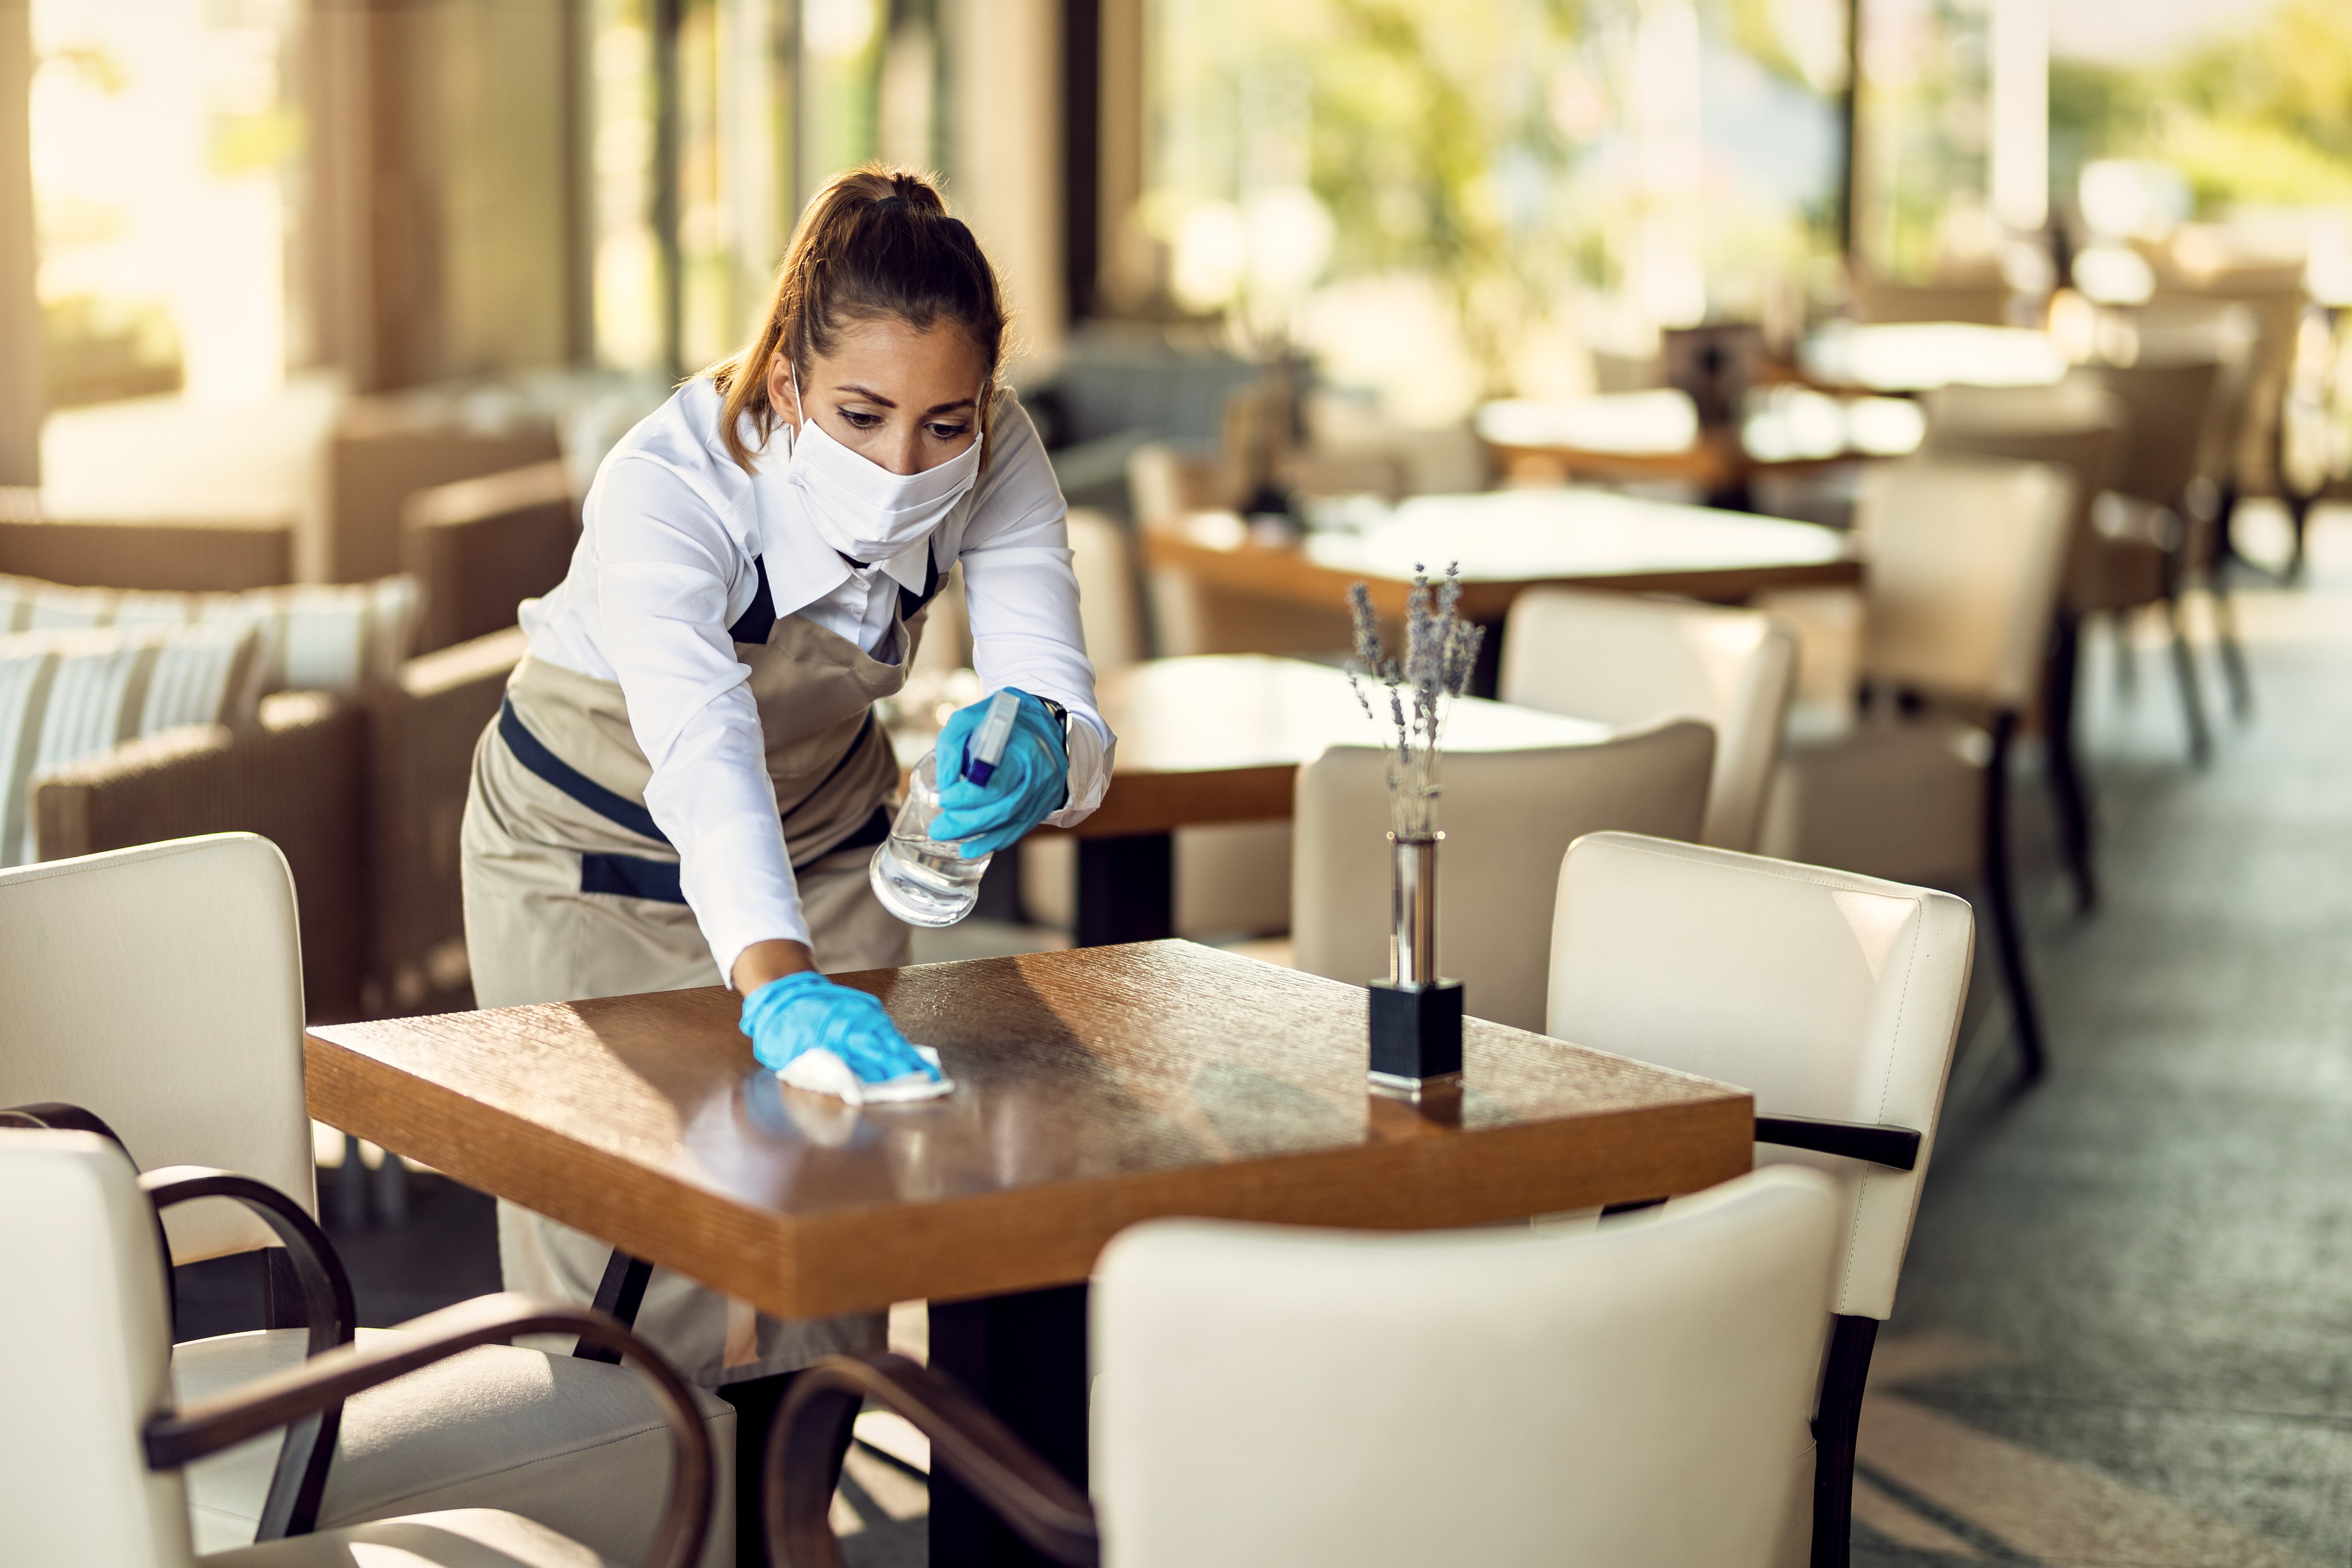 Kelsey was tidying up and preparing to close the restaurant when she saw Geraldine sitting outside. | Source: Shutterstock